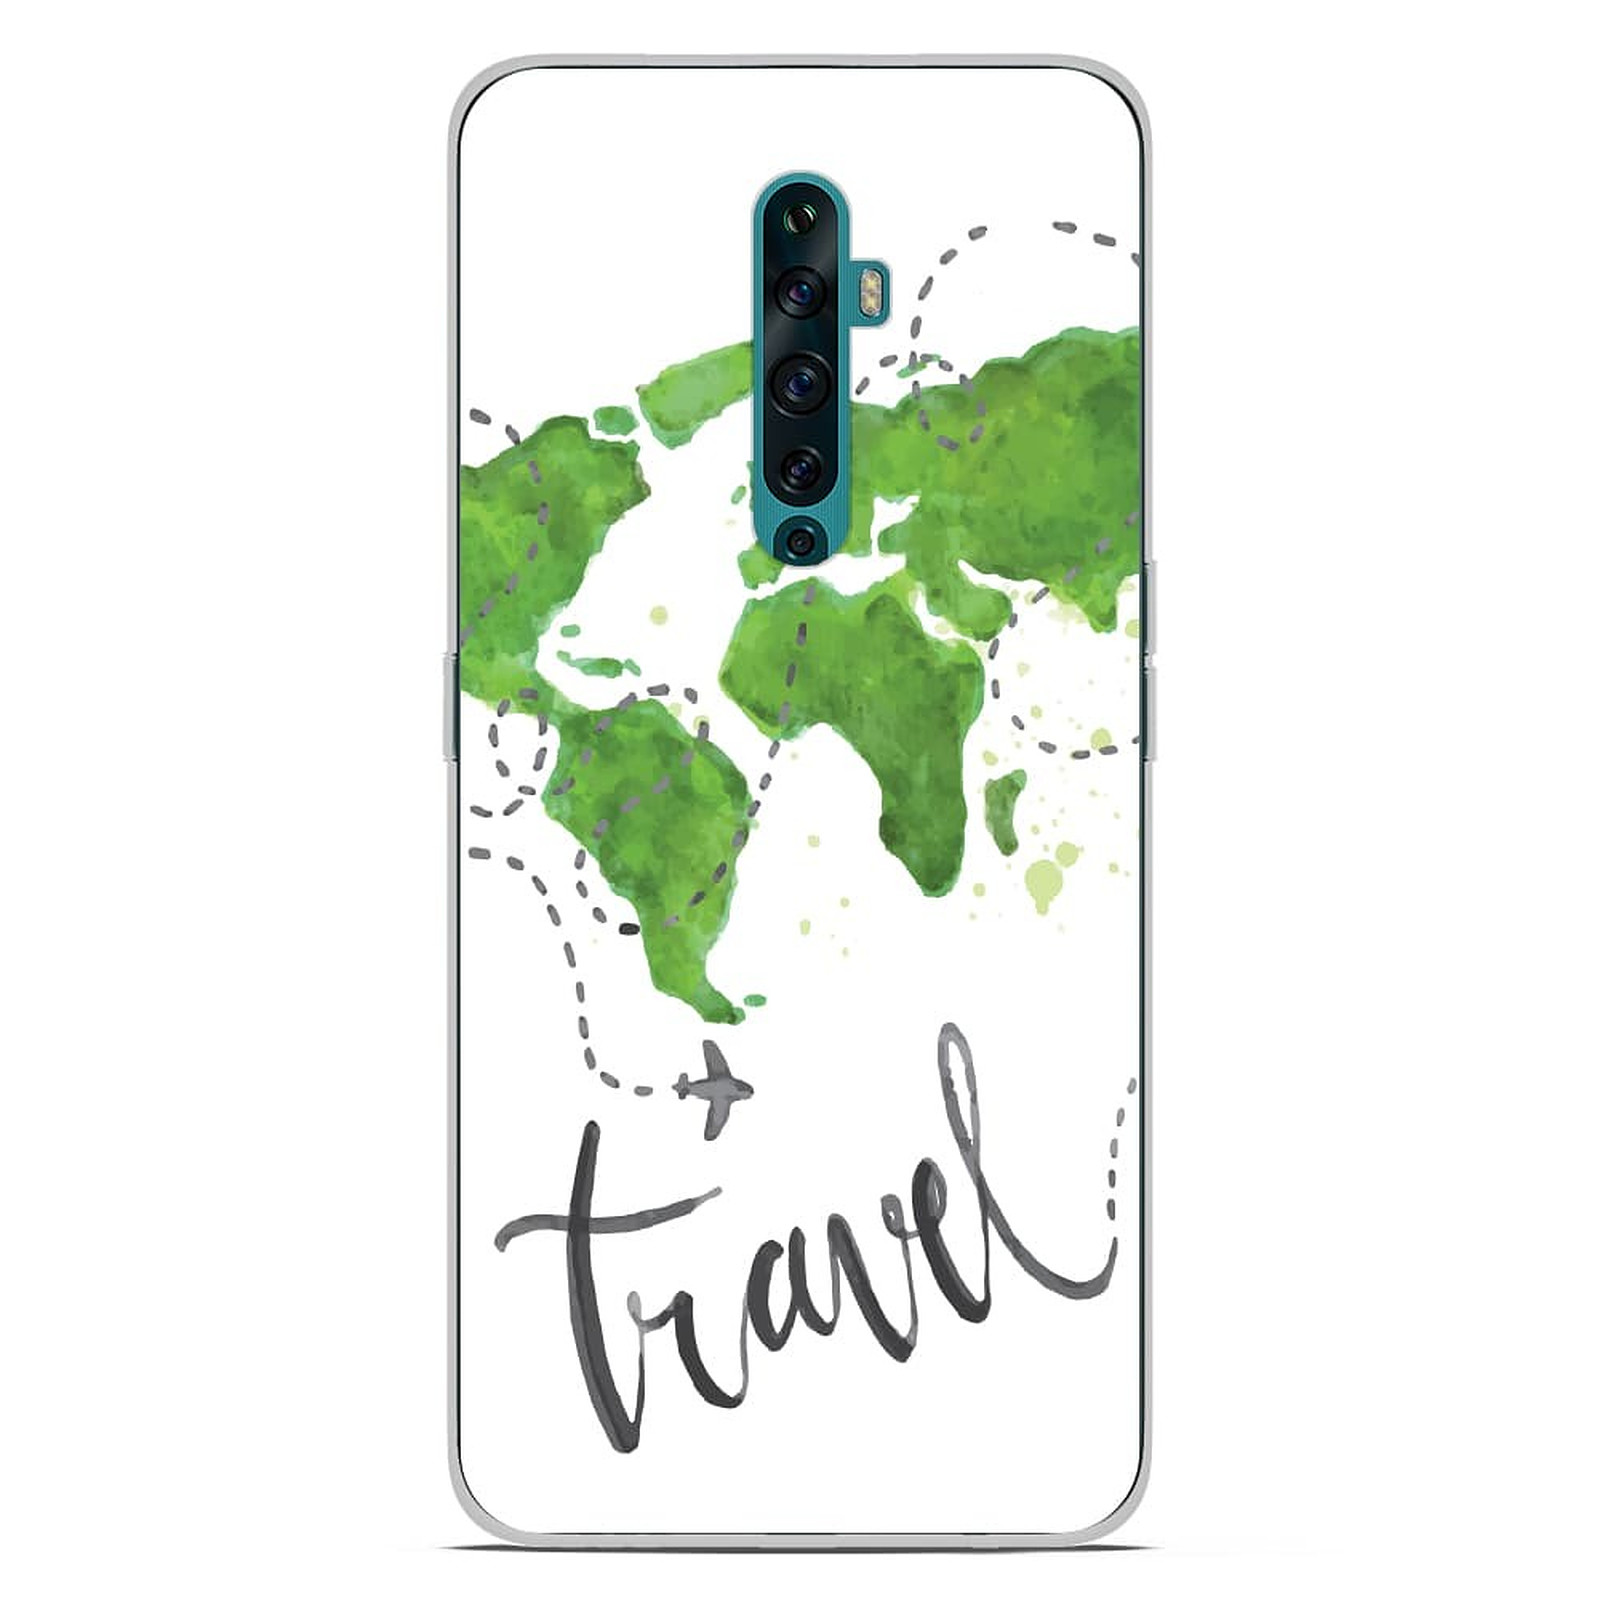 1001 Coques Coque silicone gel Oppo Reno 2Z motif Map Travel - Coque telephone 1001Coques